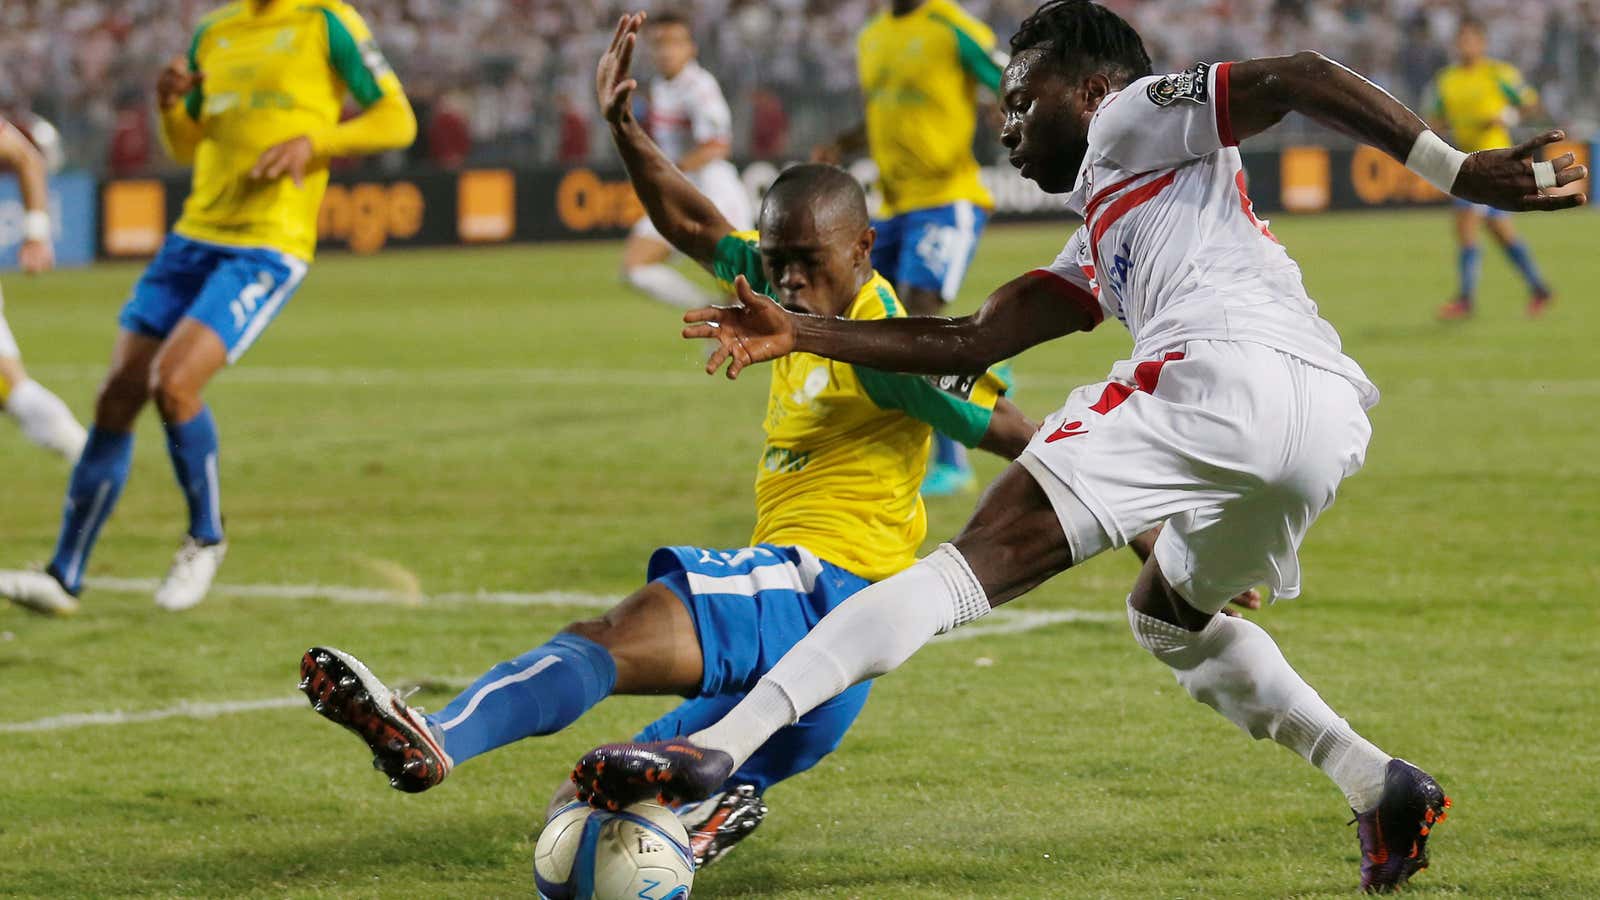 Africa-based players are constantly looking for moves abroad.